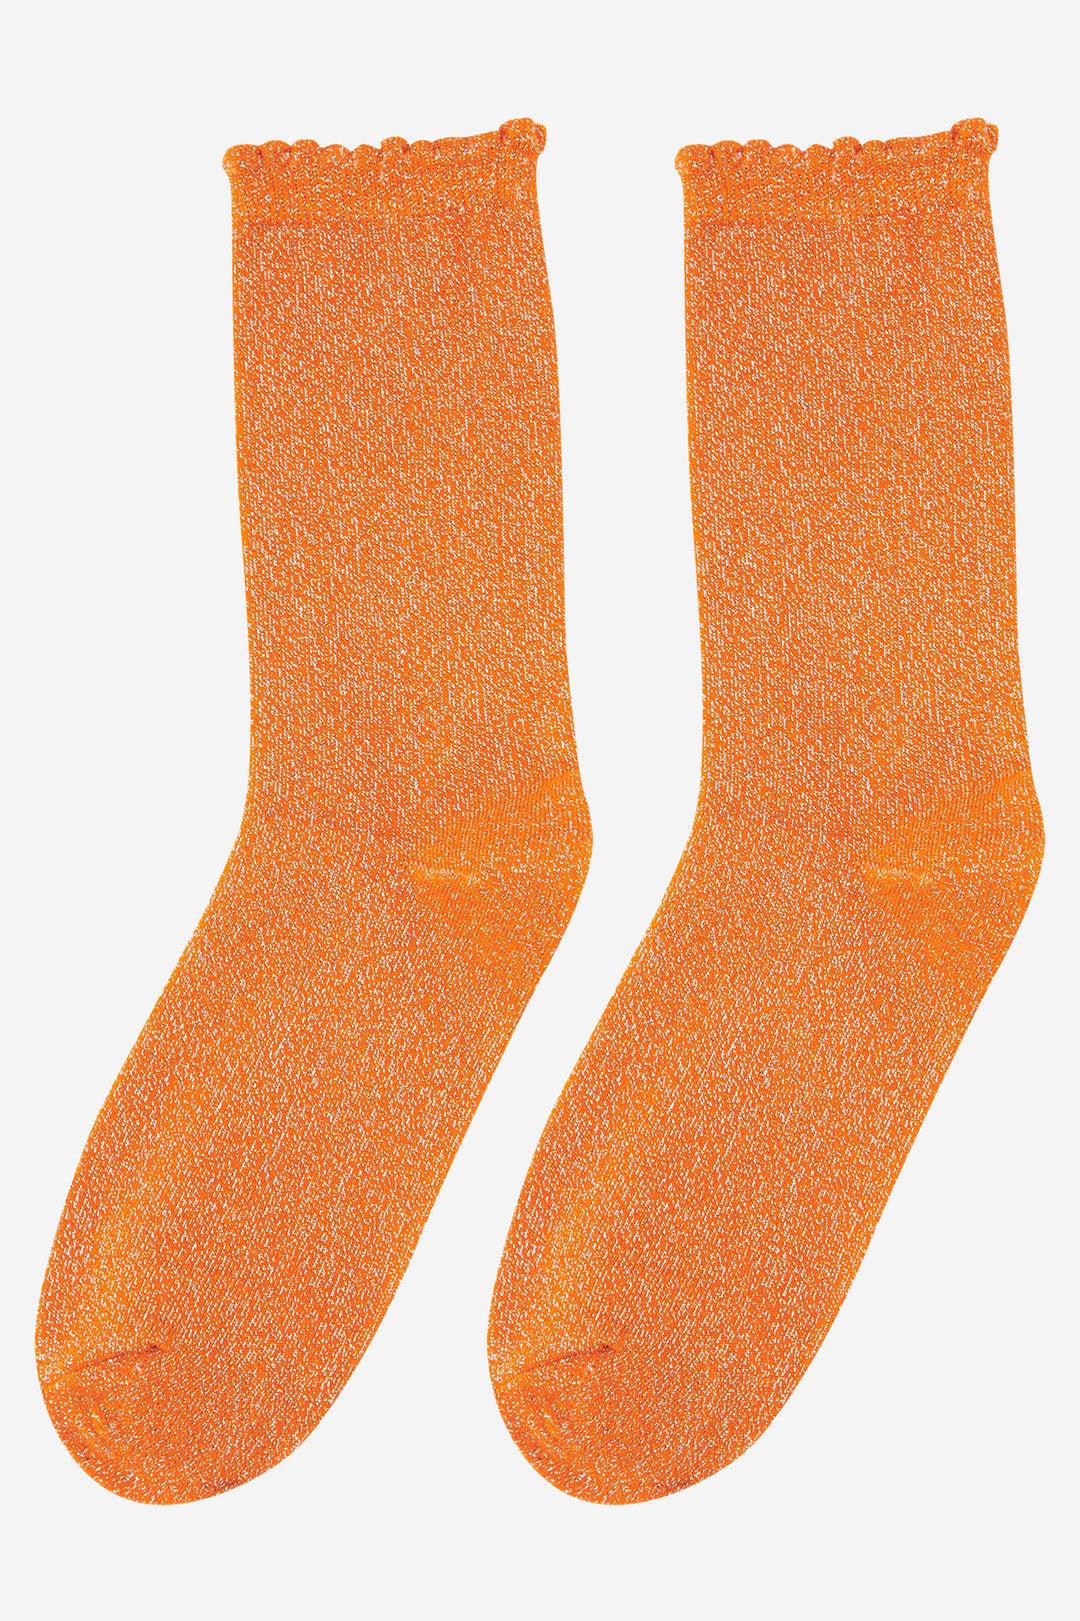 orange sparkly glitter socks with scalloped cuffs and an all over shimmer